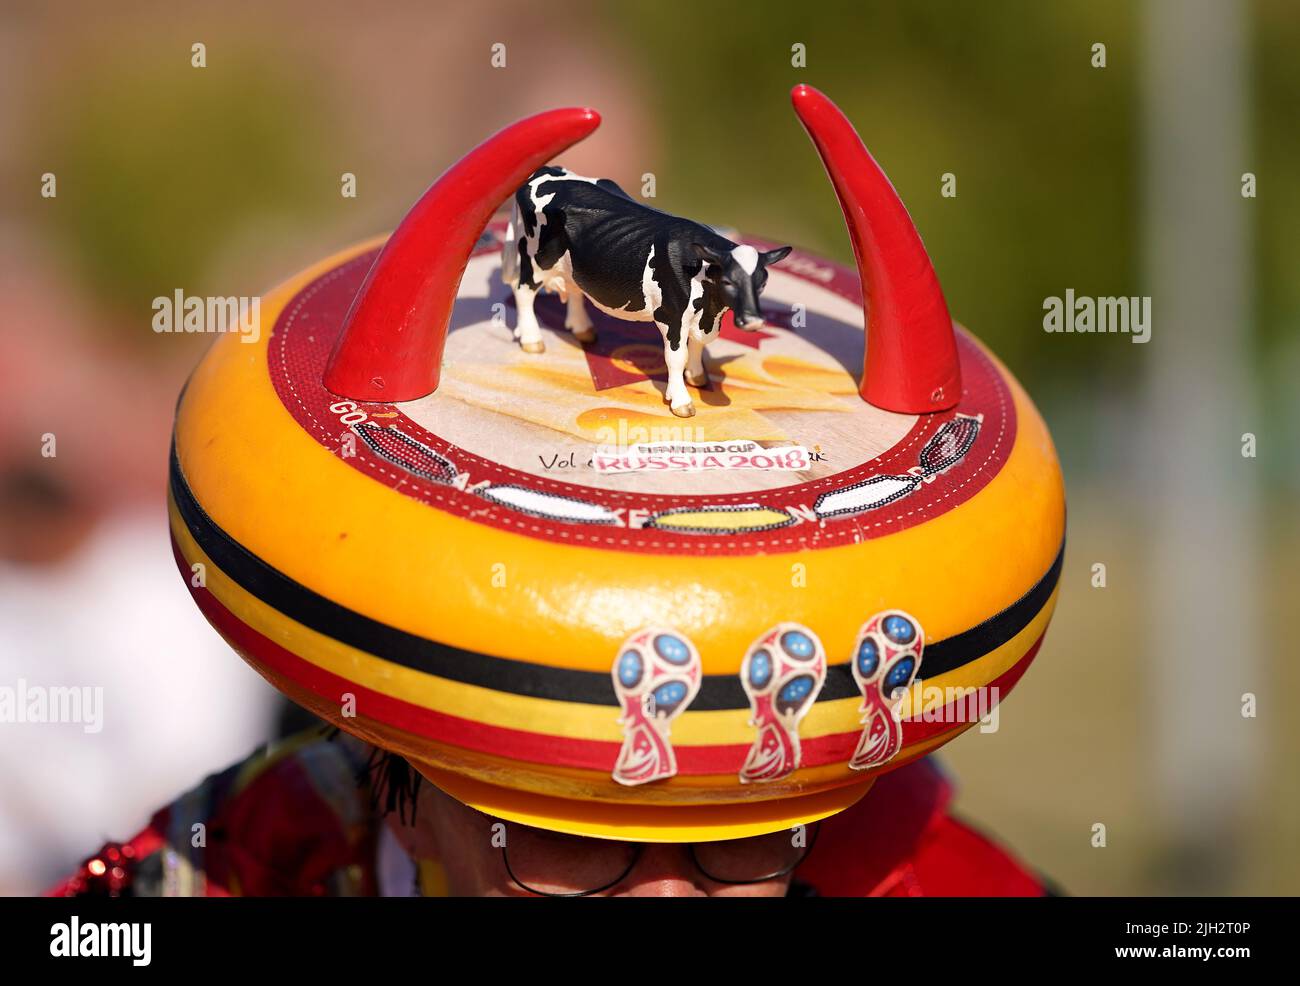 https://c8.alamy.com/comp/2JH2T0P/a-belgium-fan-wearing-a-hat-with-a-toy-cow-on-it-ahead-of-the-uefa-womens-euro-2022-group-d-match-at-the-new-york-stadium-rotherham-picture-date-thursday-july-14-2022-2JH2T0P.jpg